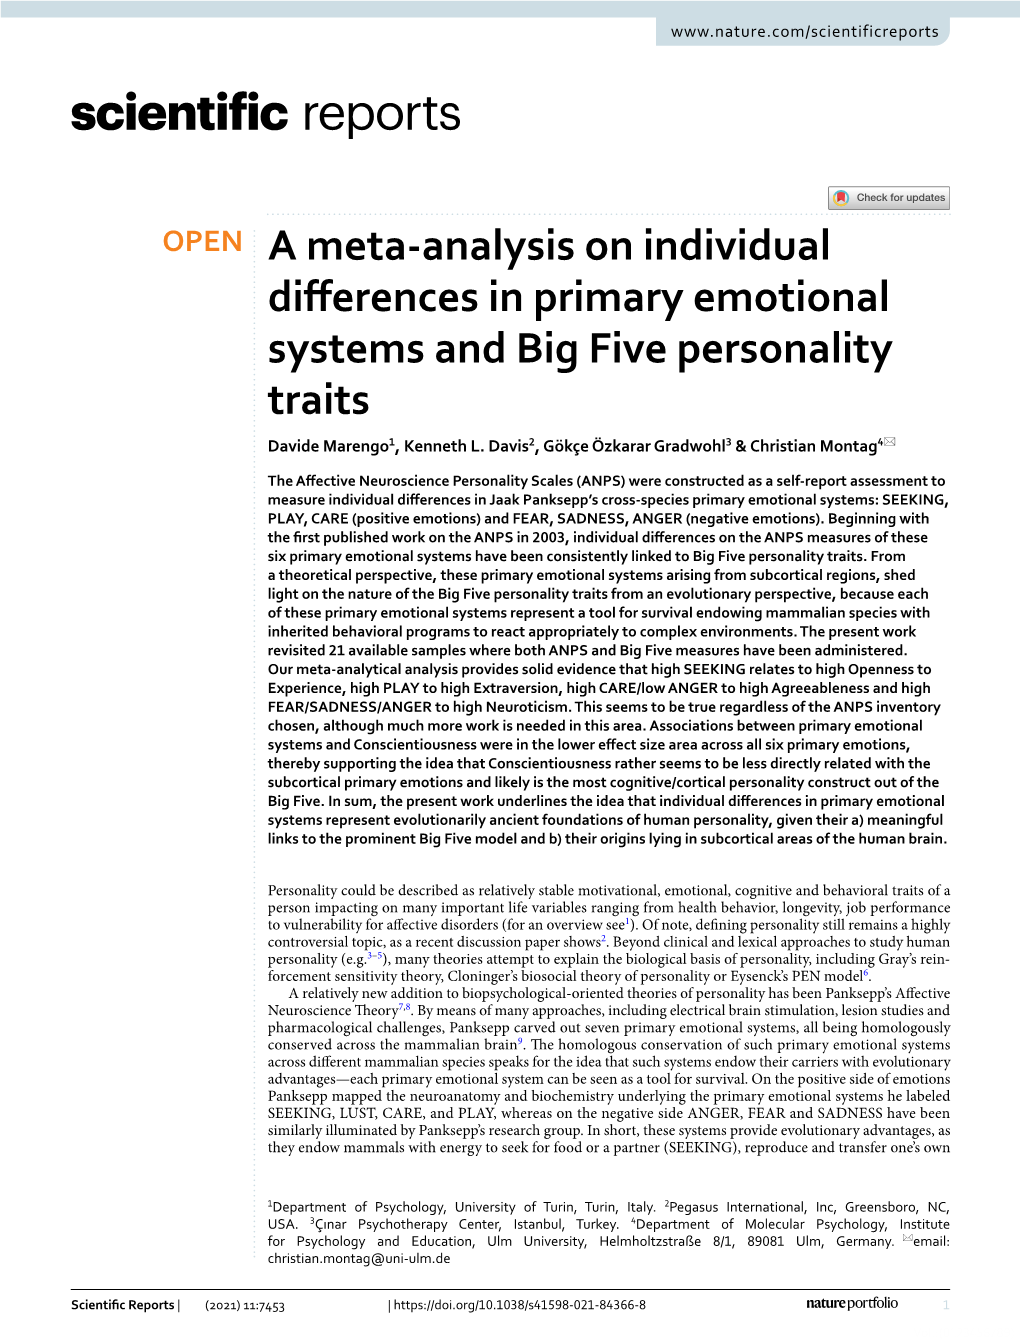 A Meta-Analysis on Individual Differences in Primary Emotional